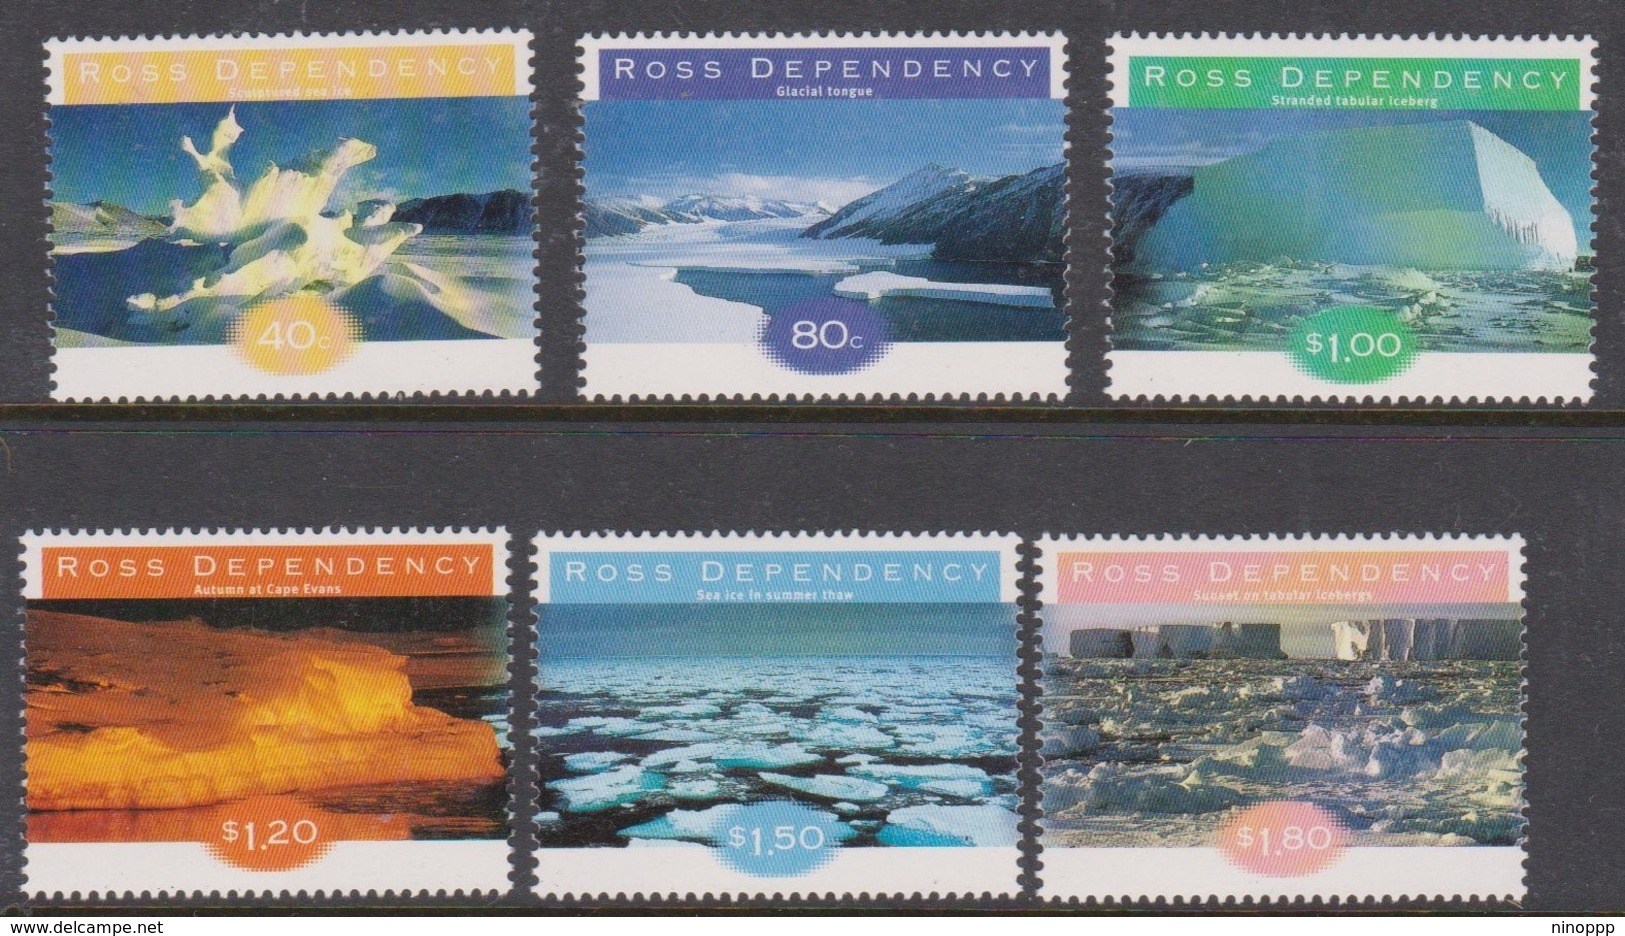 New Zealand-Ross Dependency  SG 54-59 1998 Ice Formations, Mint Never Hinged - Unused Stamps